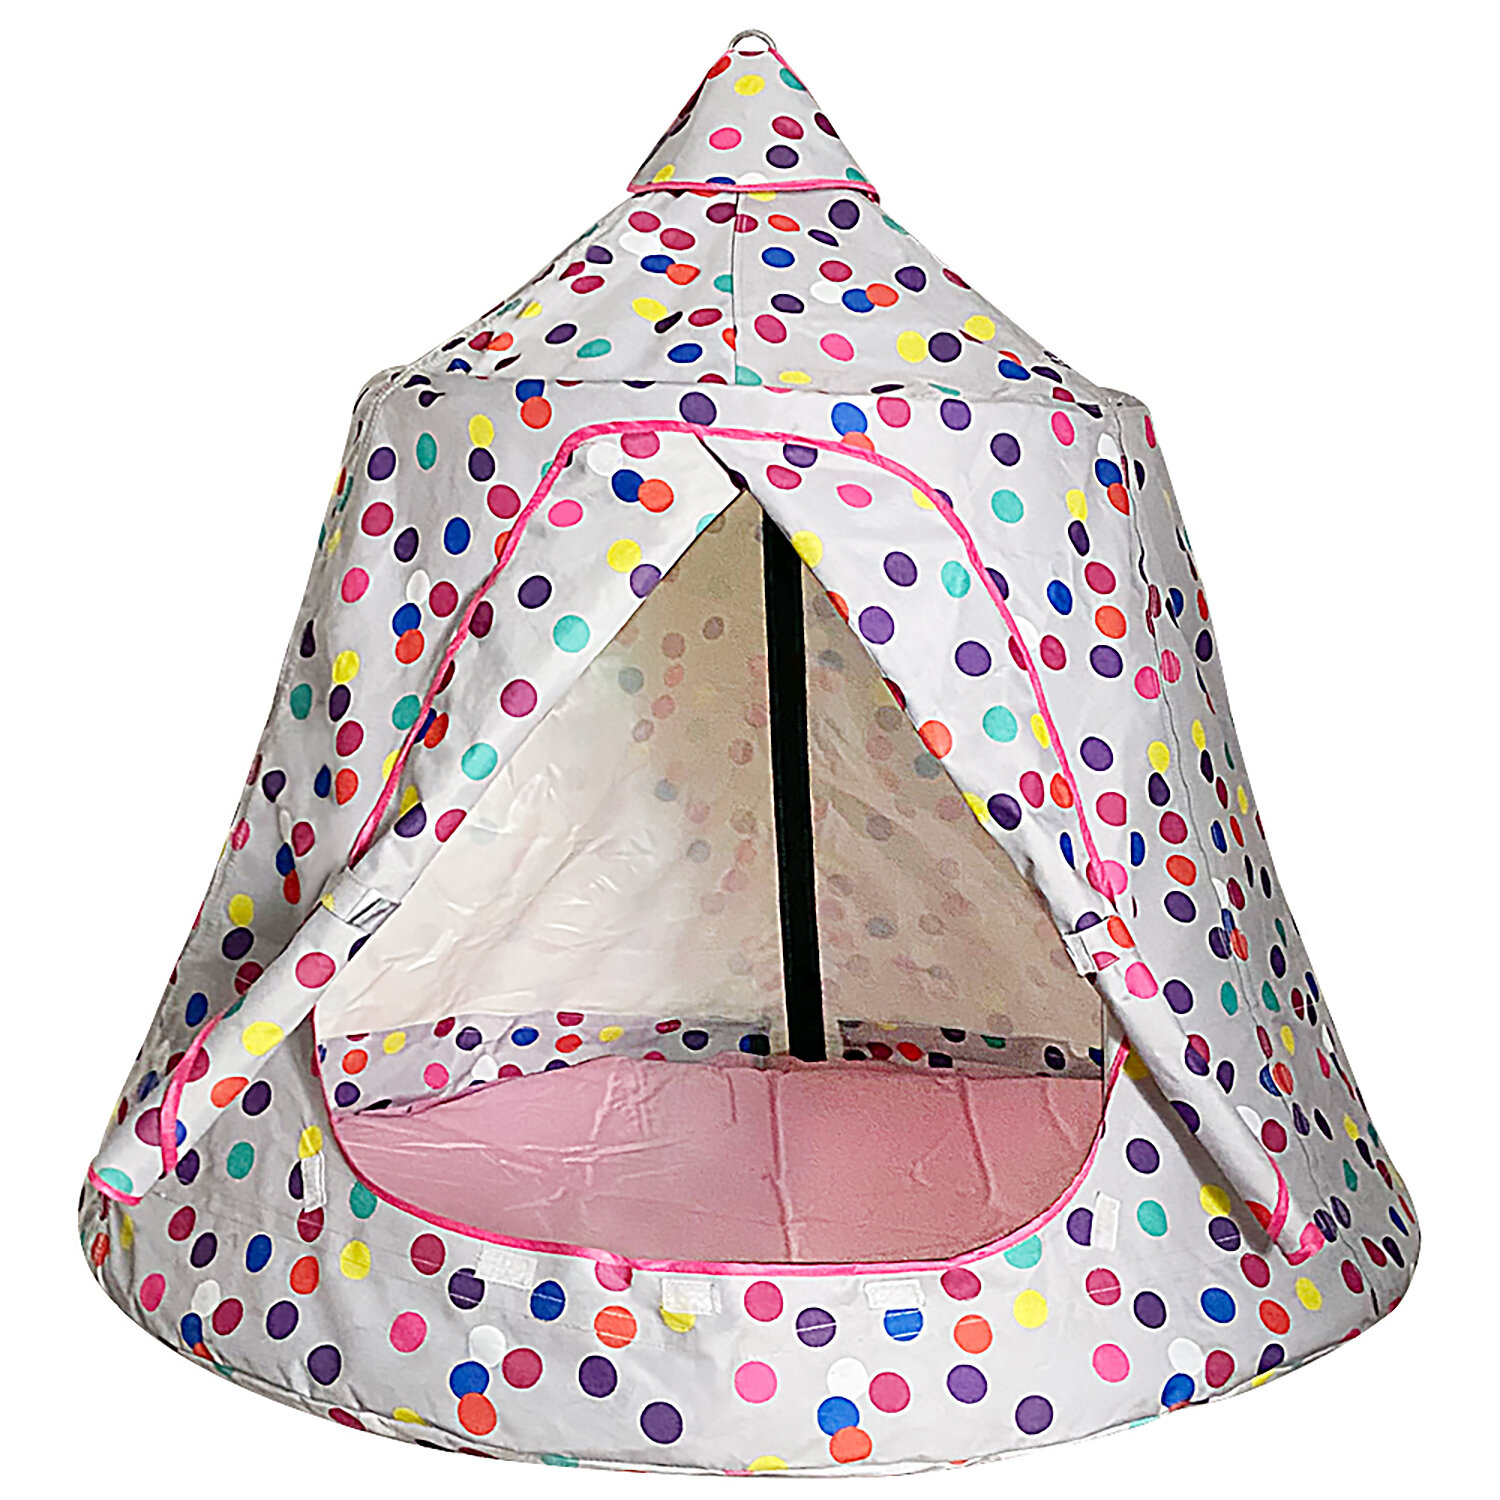 Cat Activity Center/Tent with Hanging Toy, 21 x 14, Black/White